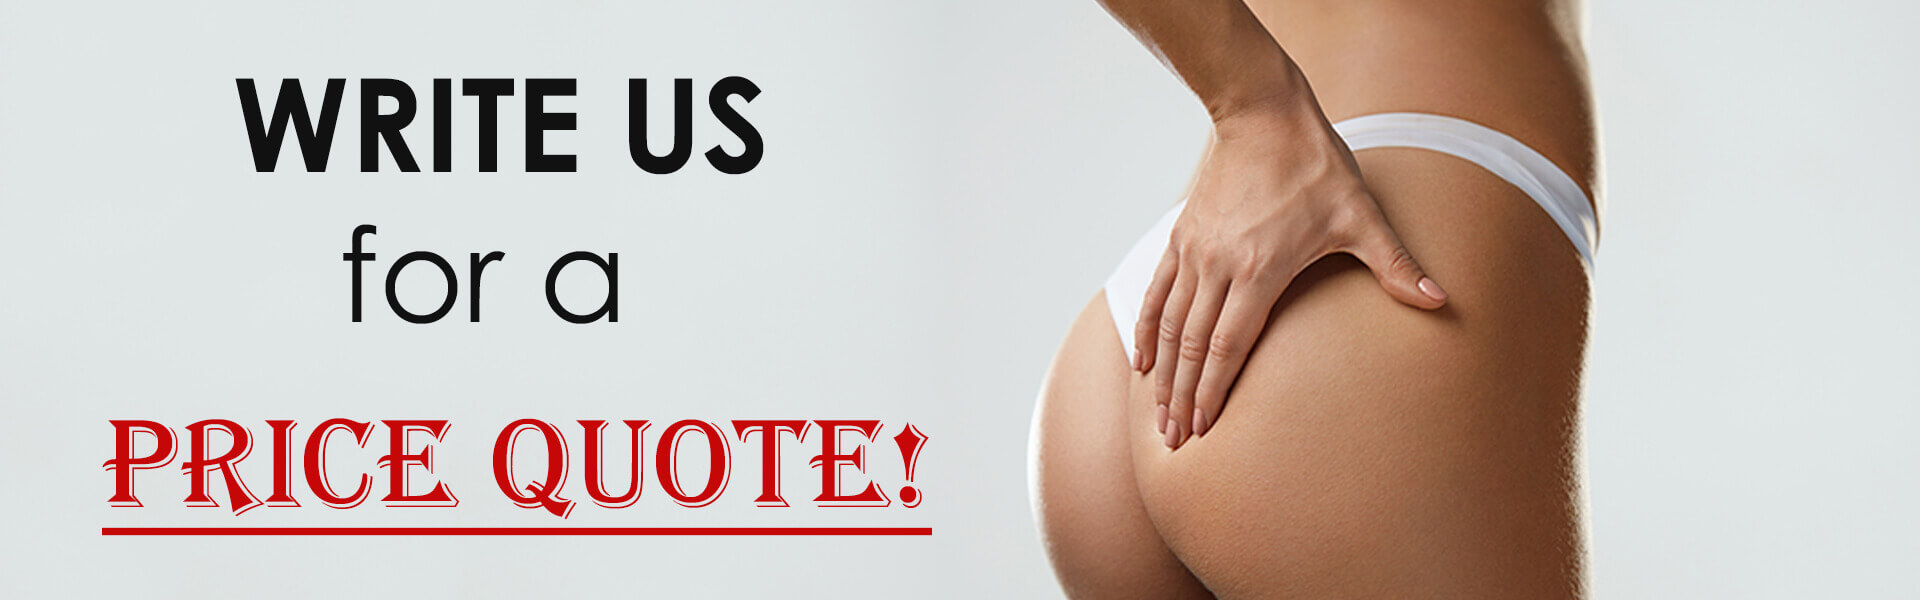 Close-up picture of a well shaped buttocks after having a brazilian buttocks lift at Nova Plastic Surgery Center in Guadalajara, Mexico.